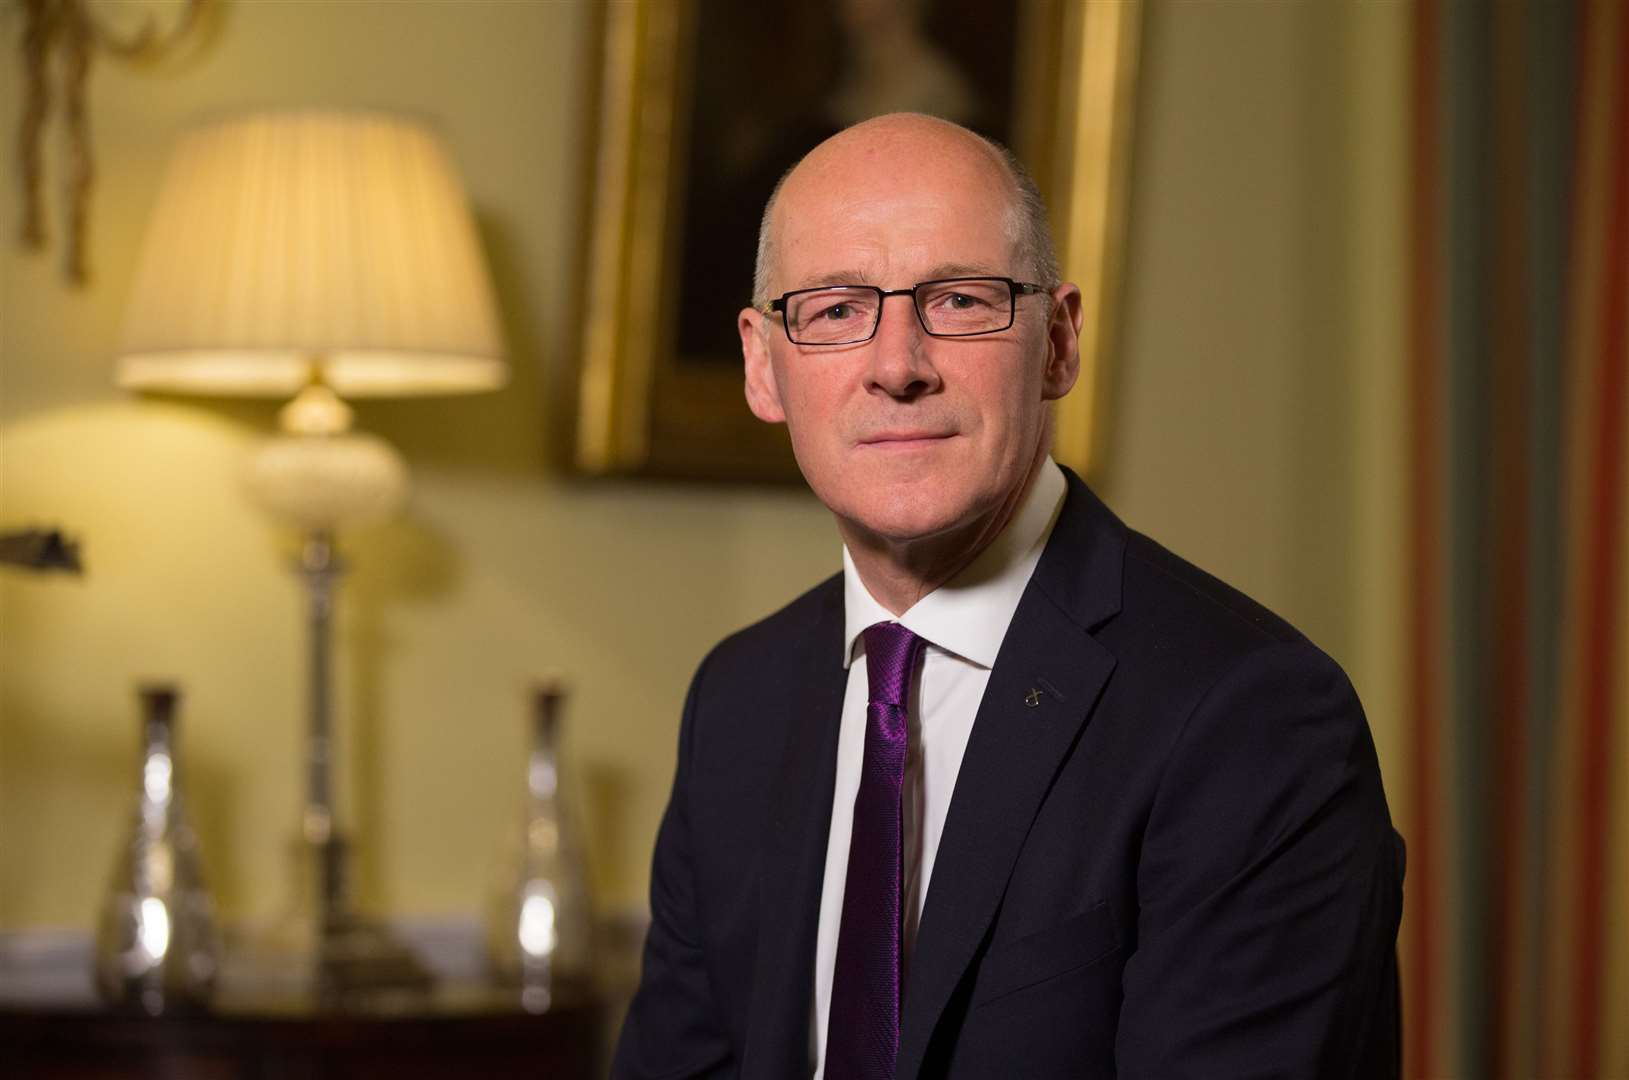 Deputy First Minister John Swinney says free school meals are a key measure for families, children and young people who need extra help.